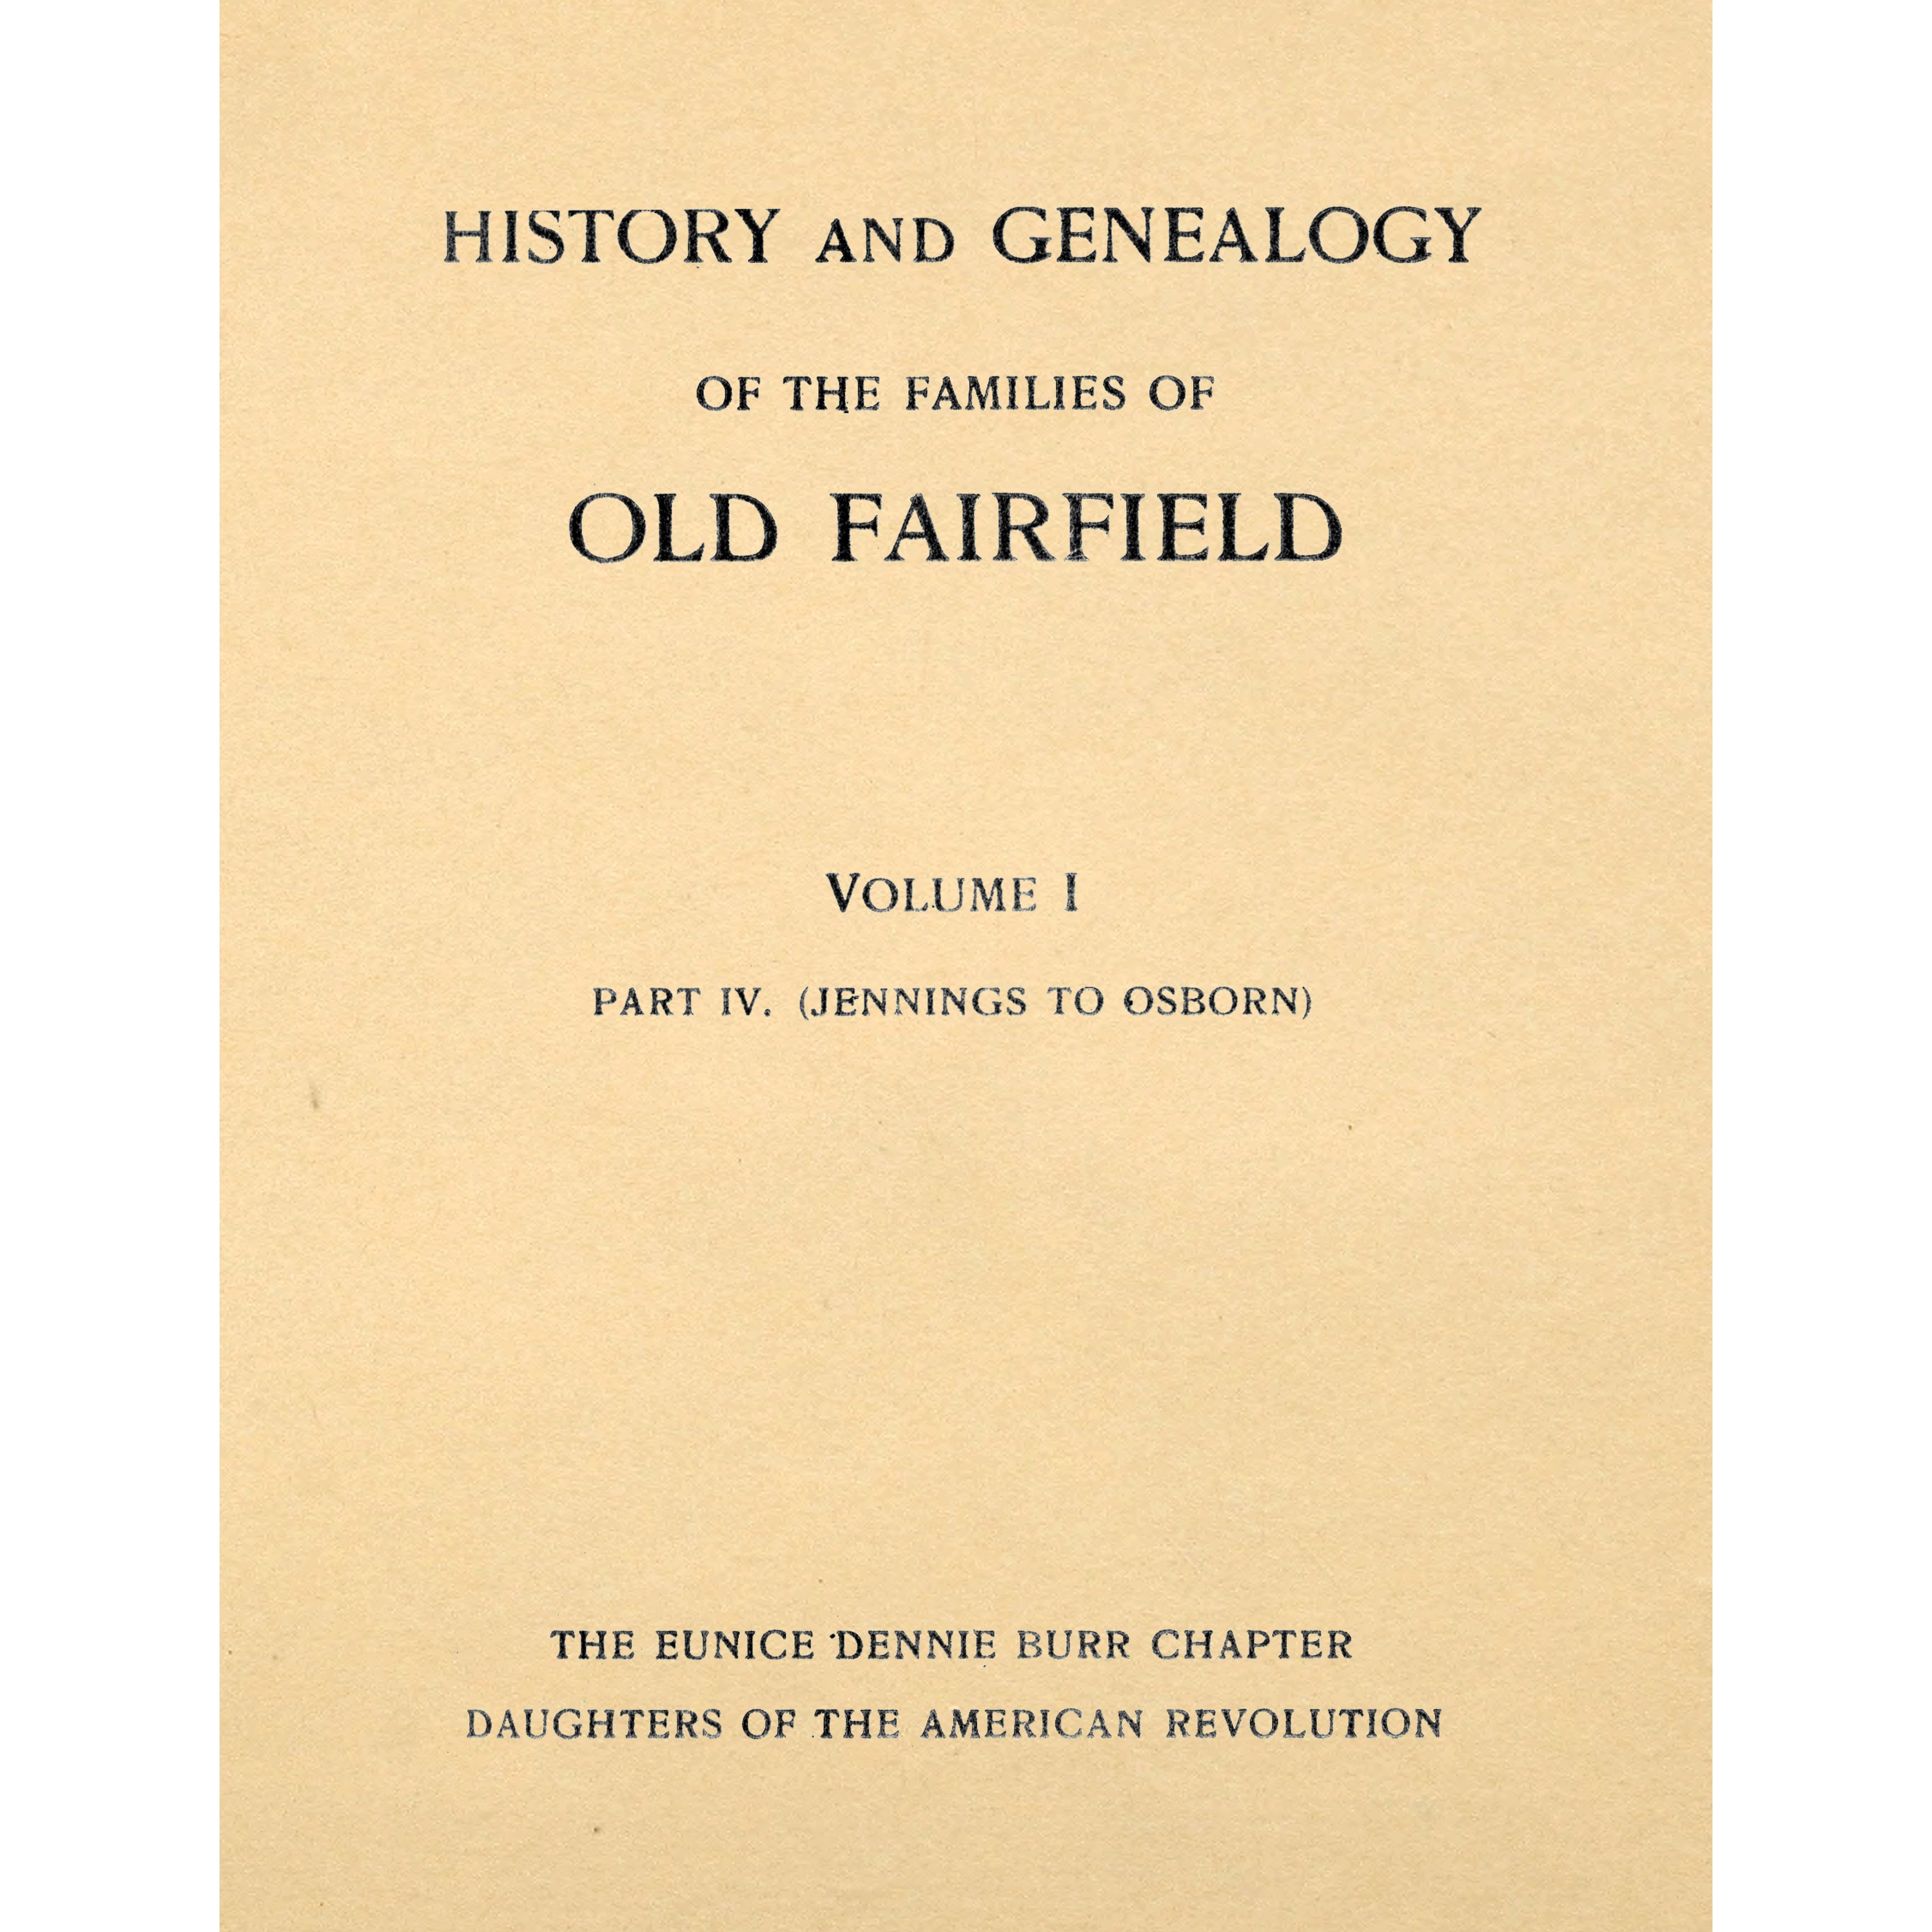 History and Genealogy of the Families of Old Fairfield Volume I Part 4. (Jennings to Osborn)